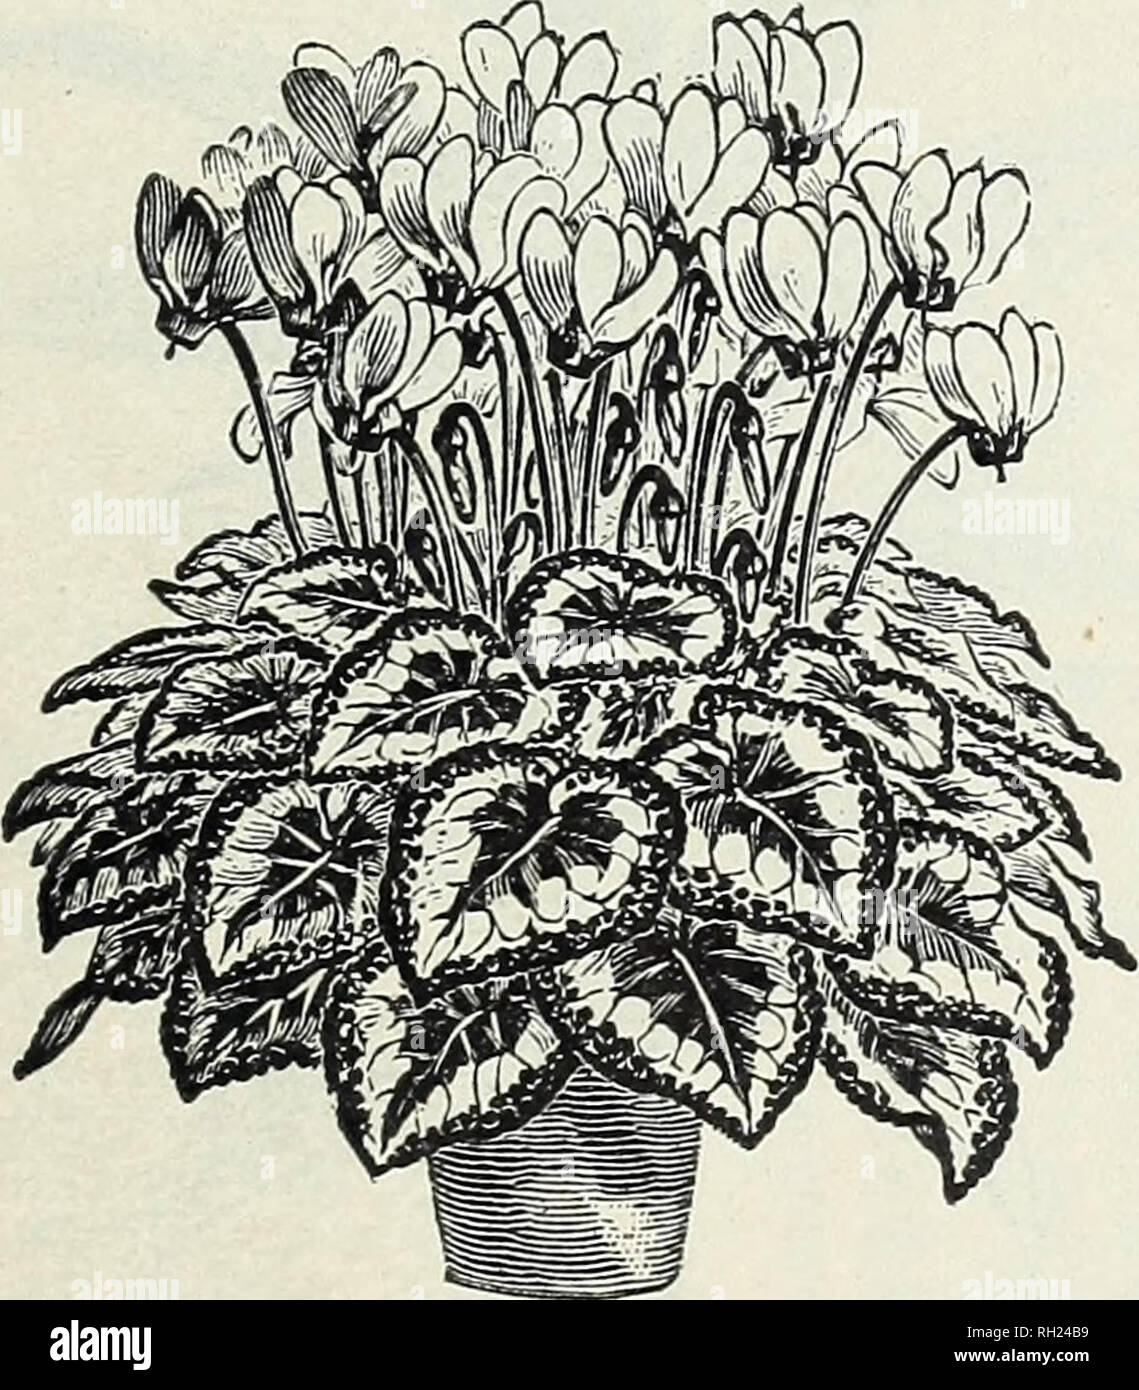 . Bulbs and plants : autumn 1904. Flowers Seeds Catalogs; Bulbs (Plants) Seeds Catalogs; Vegetables Seeds Catalogs; Nurseries (Horticulture) Catalogs; Plants, Ornamental Catalogs; Gardening Equipment and supplies Catalogs. ASPARAGUS PLUMOSUS NANUS. Cyperus Alternifolius. (Umbrella Plant.) An excellent house plant, too well known to need any description. Each. In 3-inch pot 15 In 4-inch pot 25 In 5-inch pot 50 Asparagus. Very pretty and graceful Fern-like plants rival- ling- in beauty even the delicate Maiden Hair Fern. They are excellent house plants and succeed well with ordinary care. Plumos Stock Photo